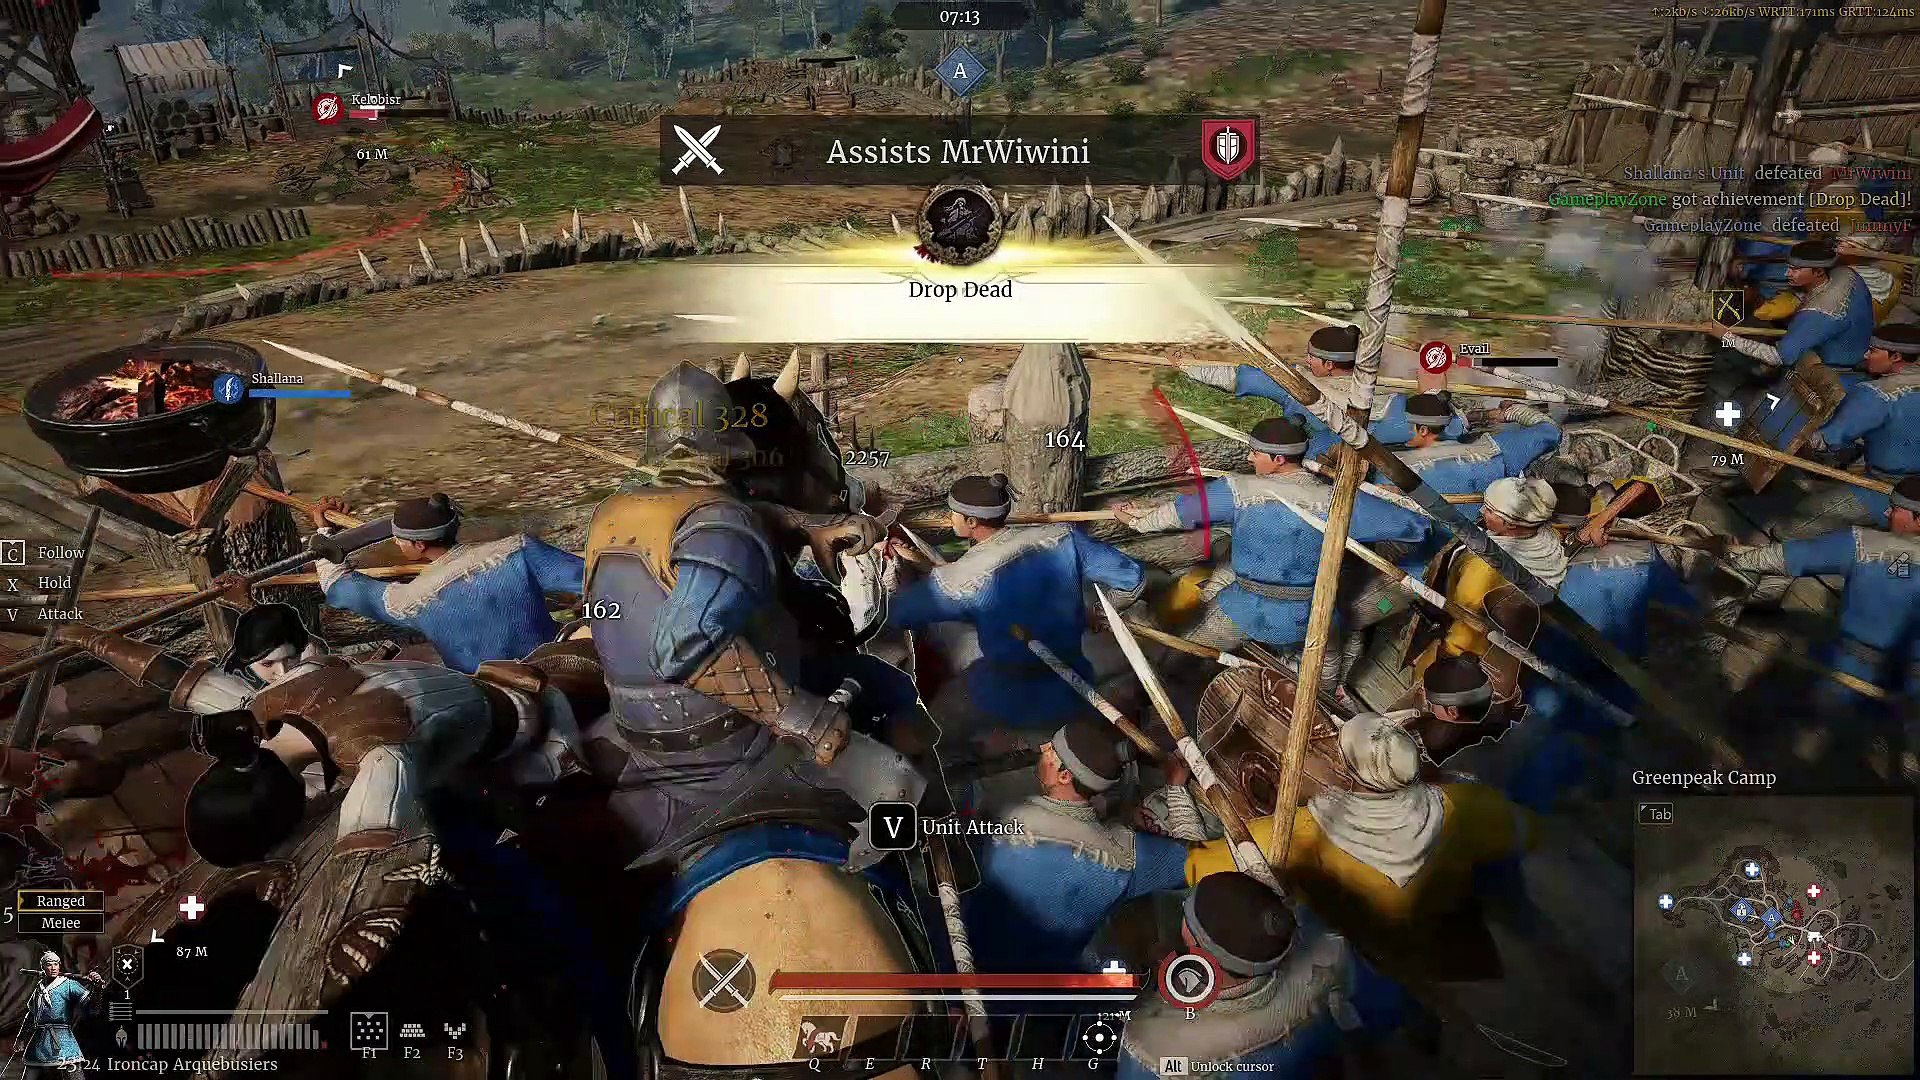 Conqueror's Blade - Gameplay (2020) HQ PC - video Dailymotion